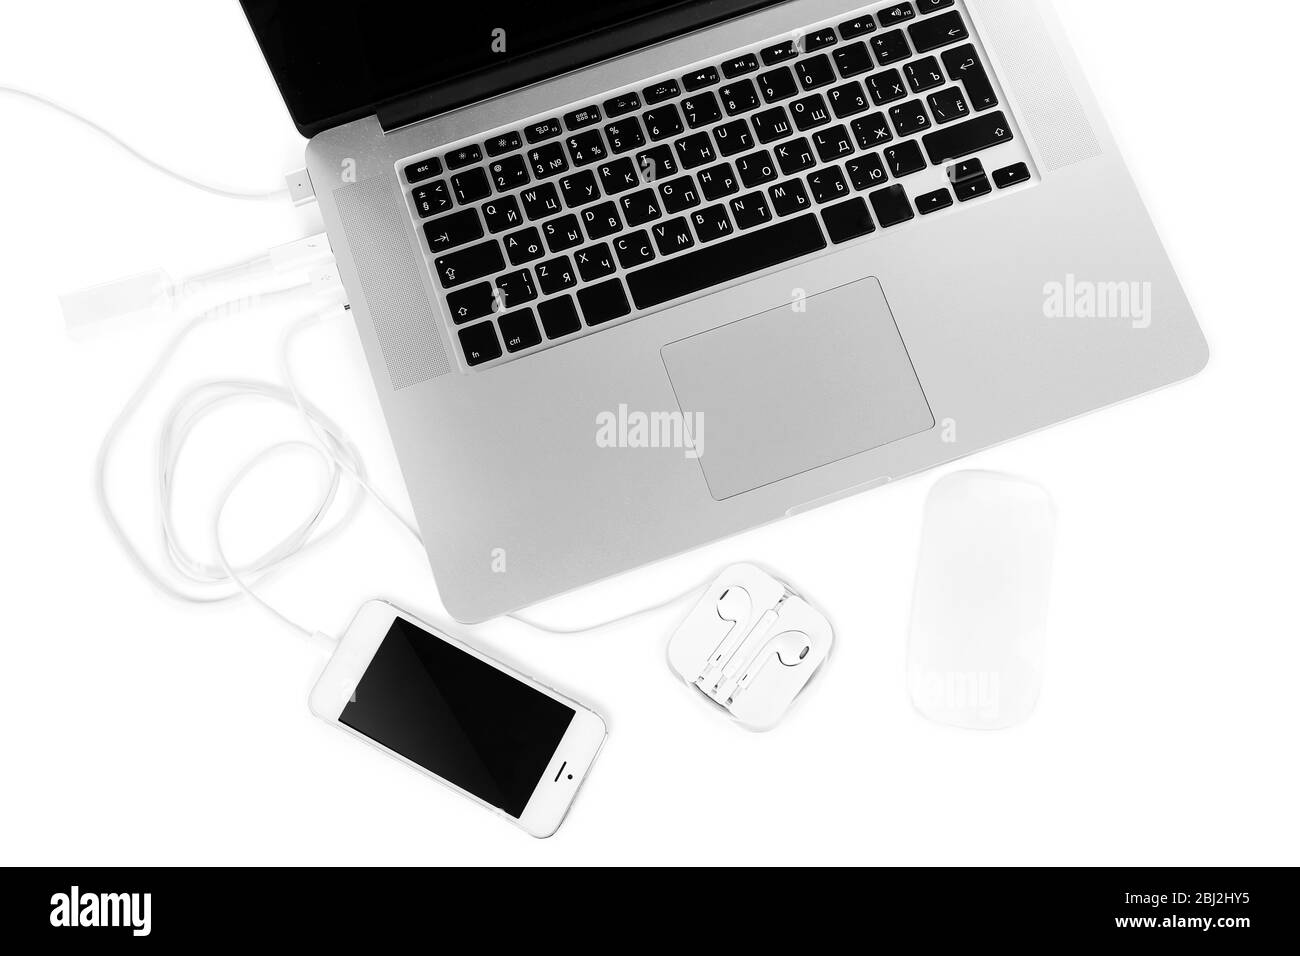 Computer peripherals and laptop accessories isolated on white Stock Photo